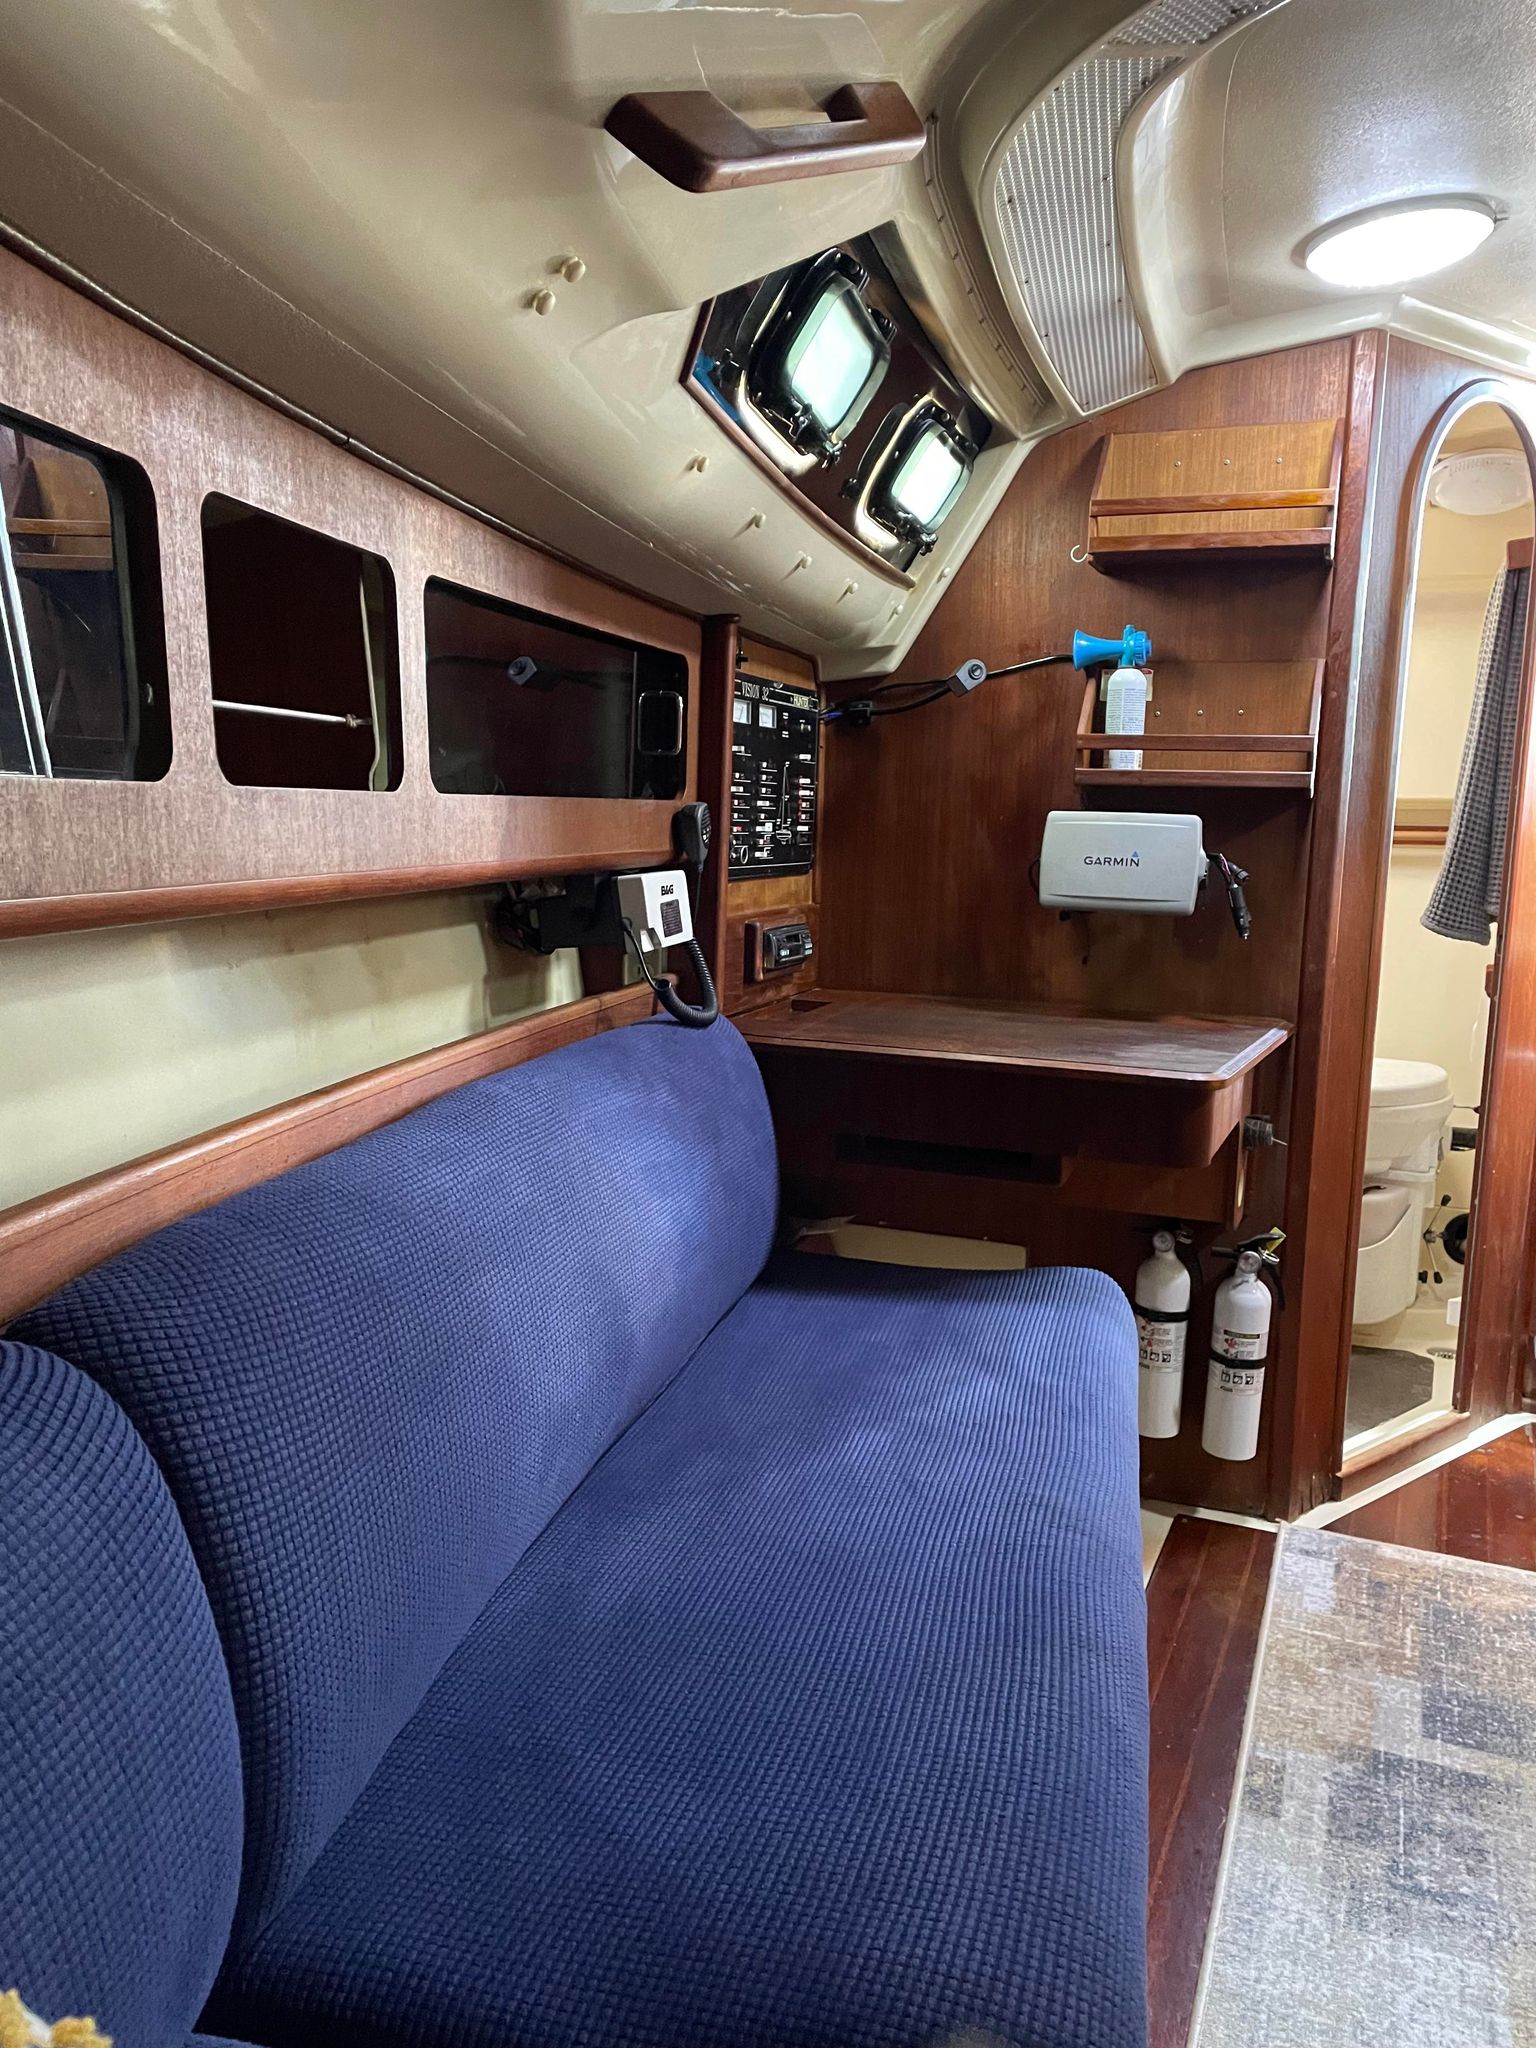 Salon seating in a 32' sailboat